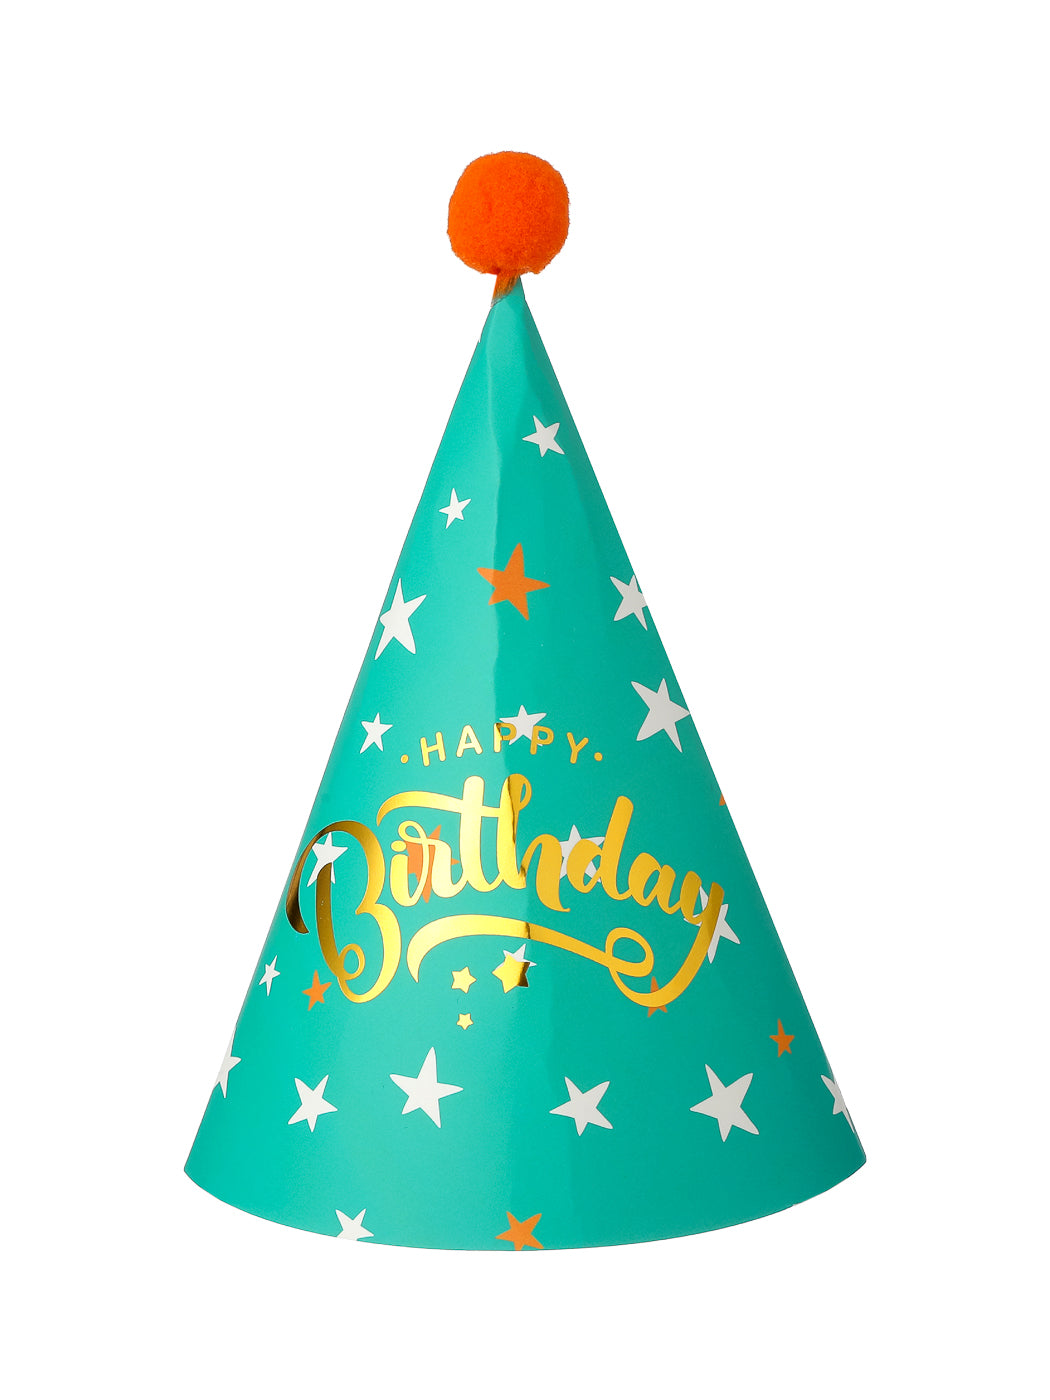 MINISO BIRTHDAY PARTY HAT(GREEN, STARS) 2010879910100 PARTY DECORATIONS